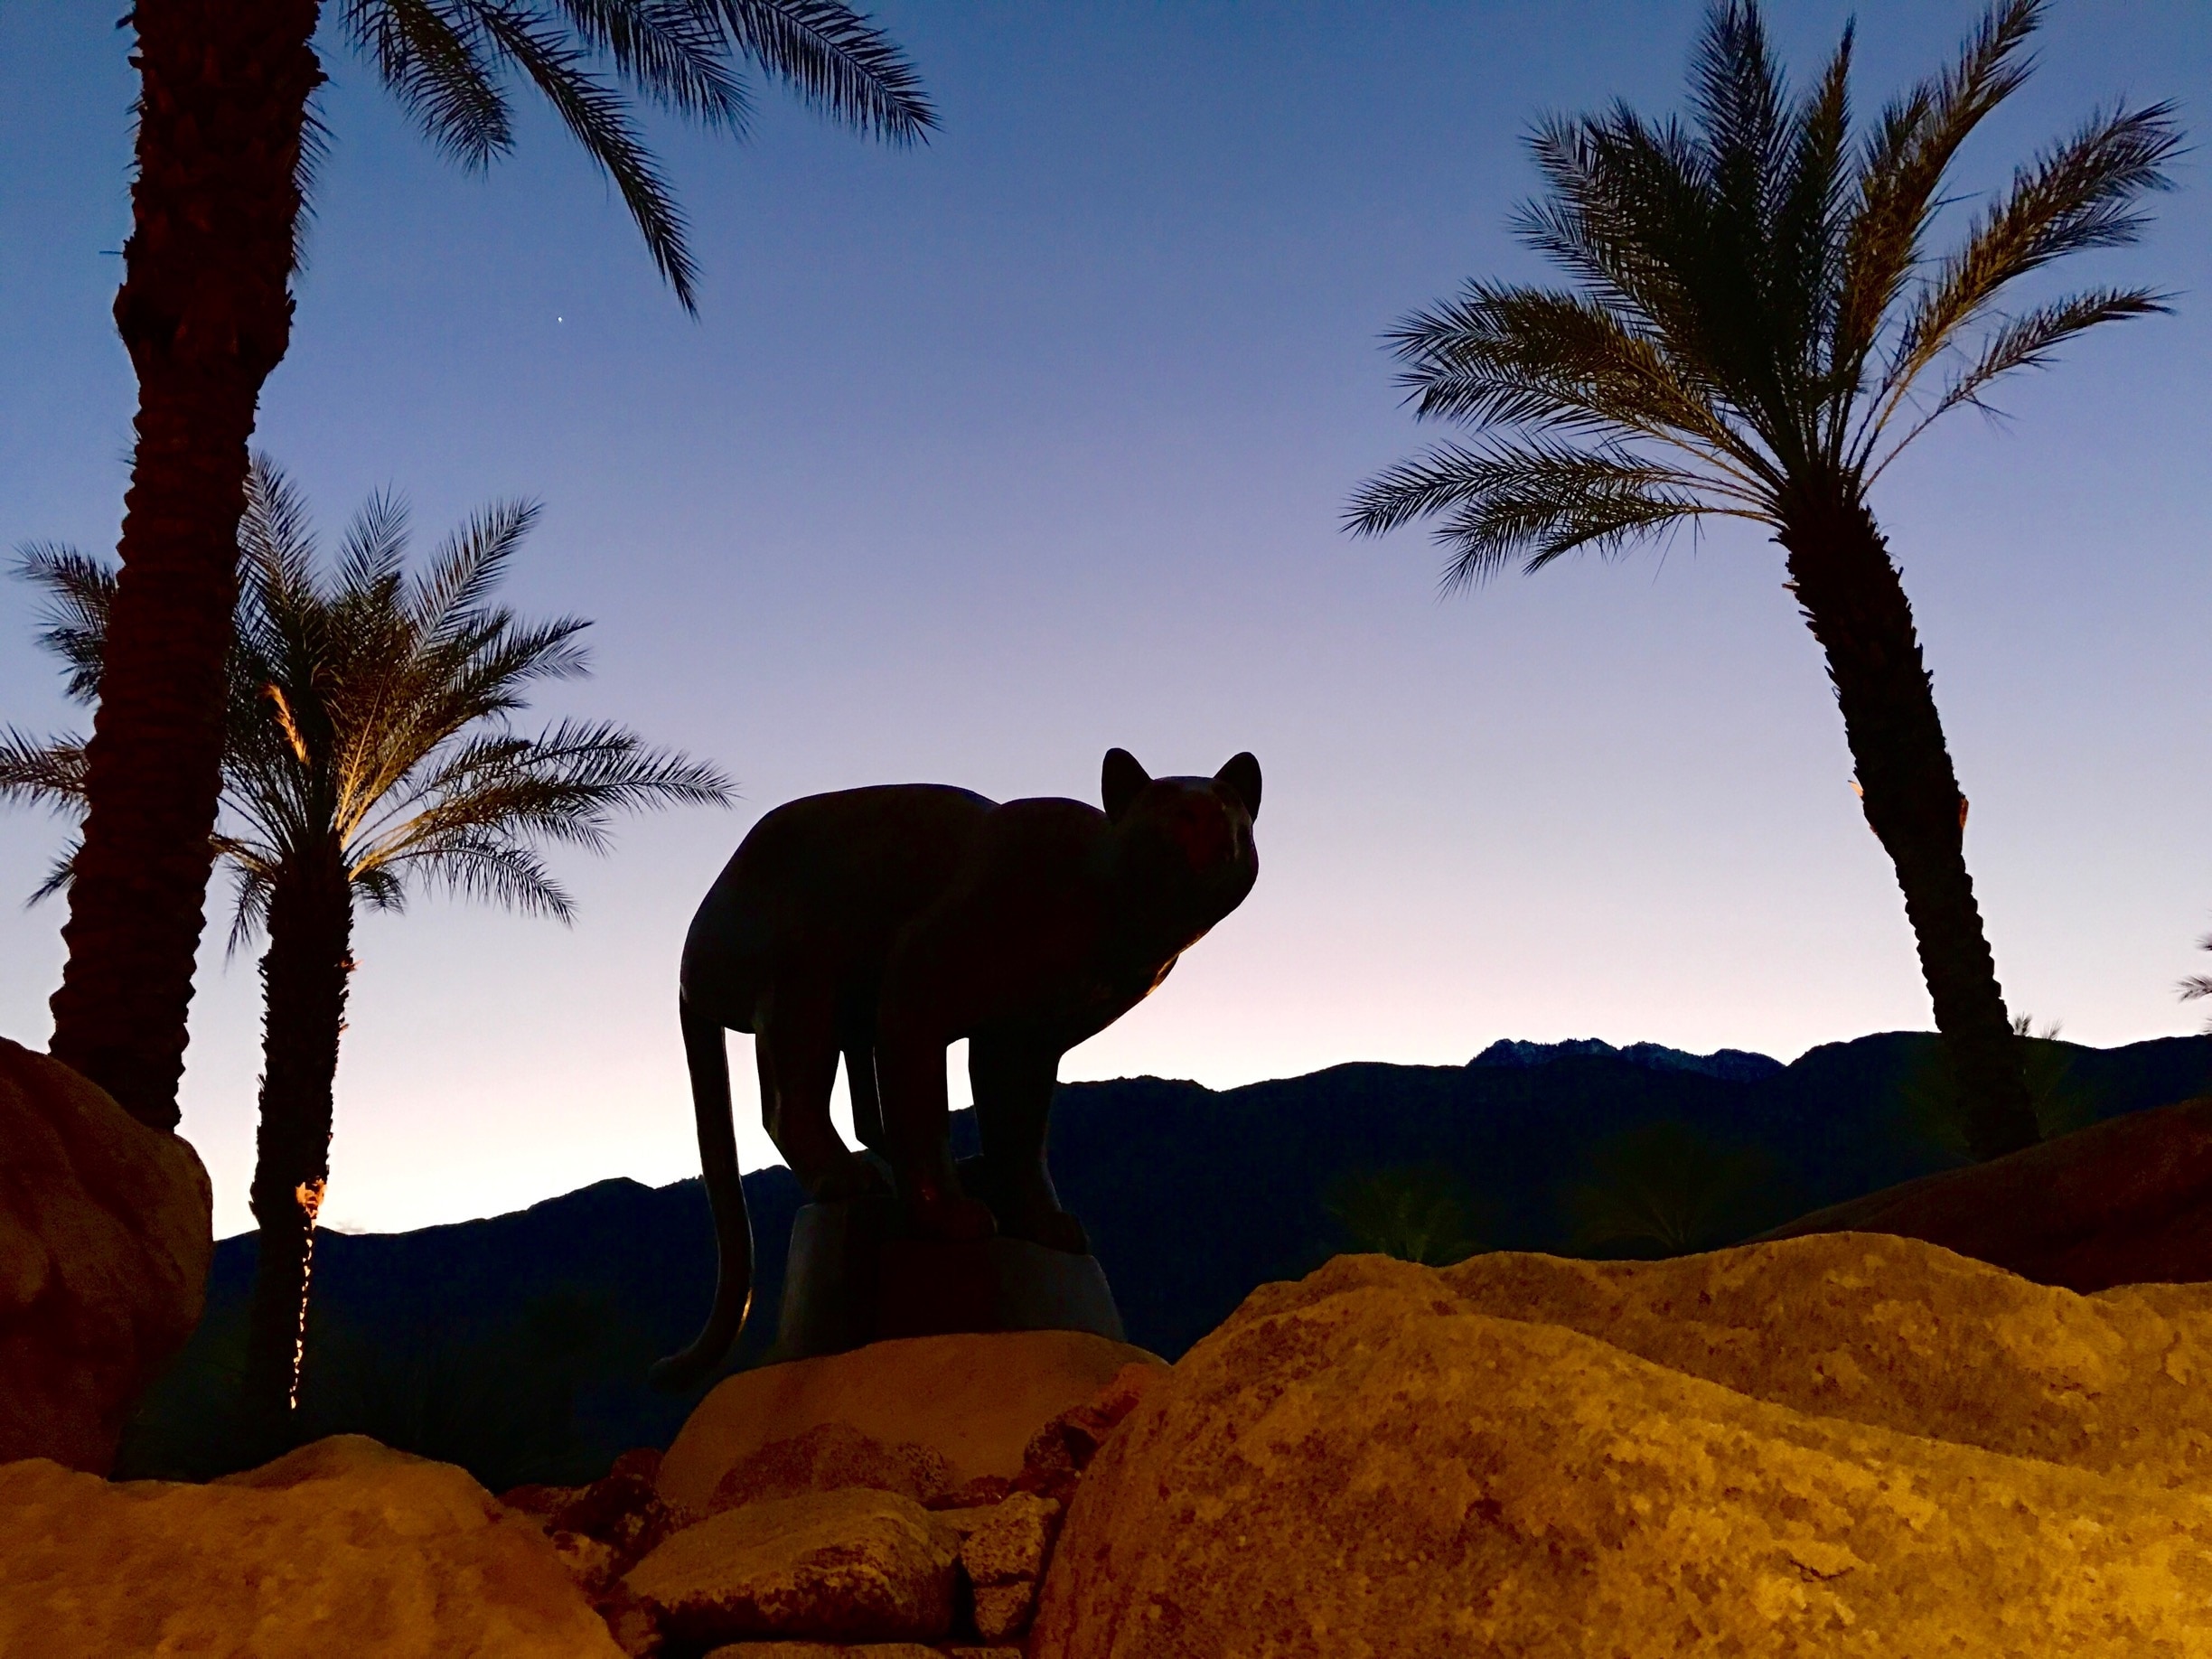 The photo was shot at the Palm Springs convention center at dusk. The mountain cat which appears so real was the silhouette of a bronze sculpture. The beautiful backdrop made for a surreal image.